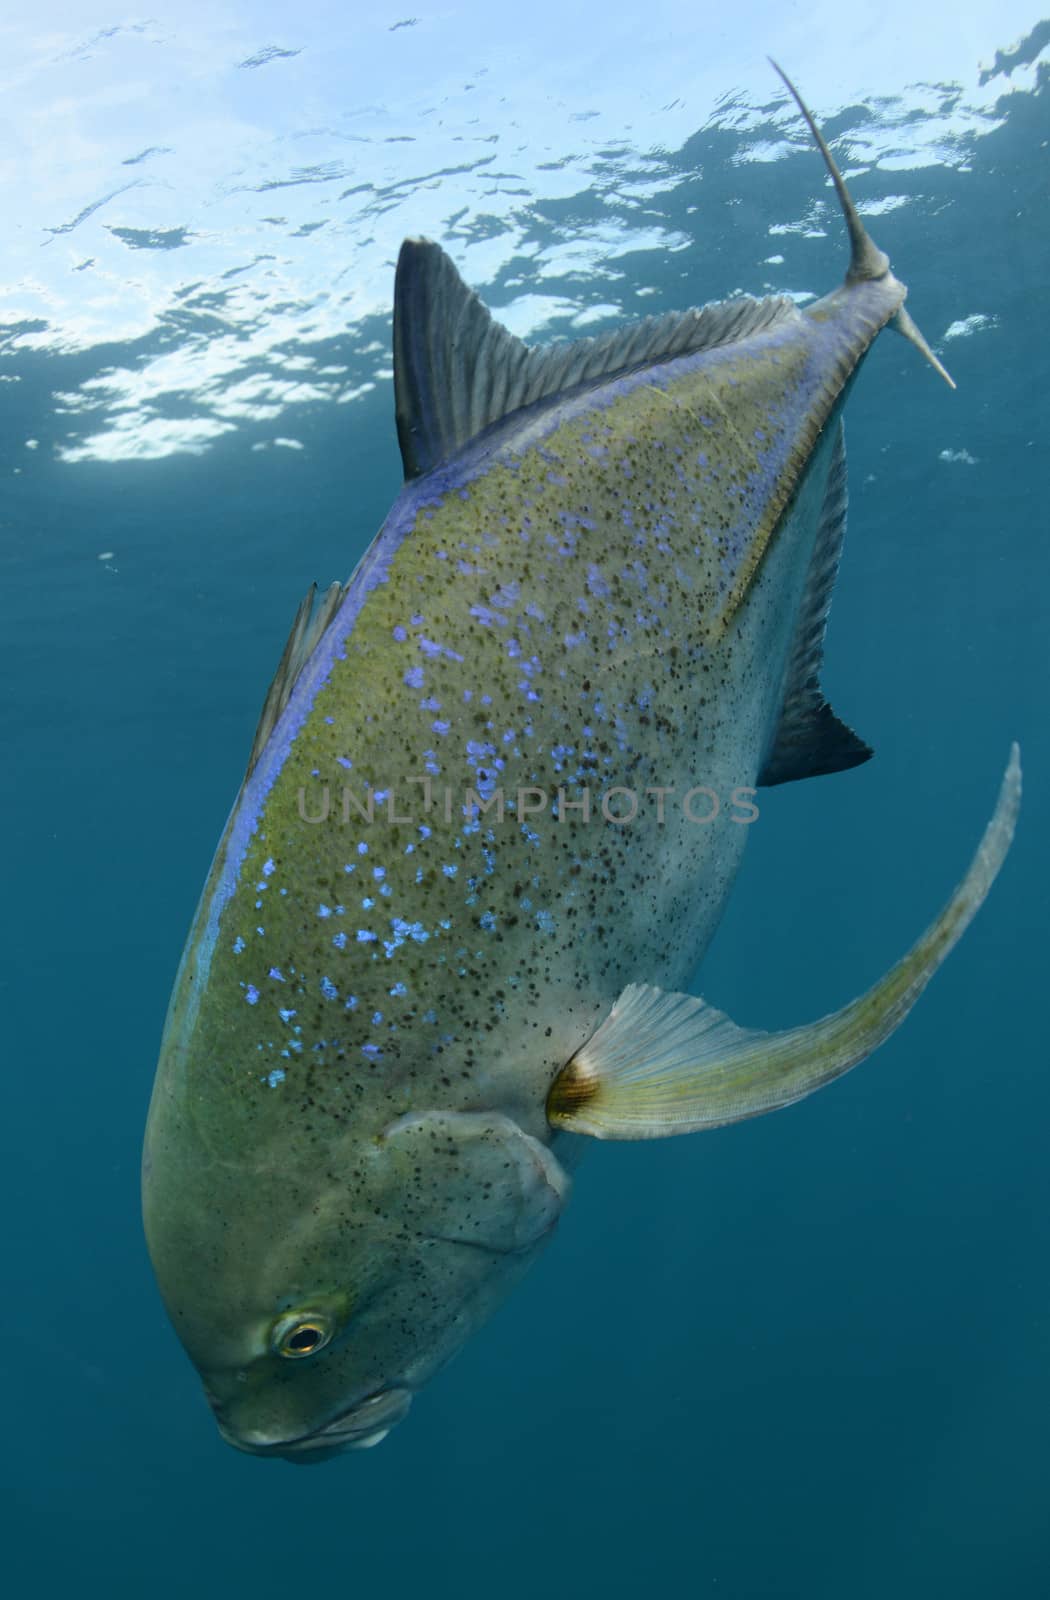 Bluefin trevally fish swimming and its natural habitat in the wild